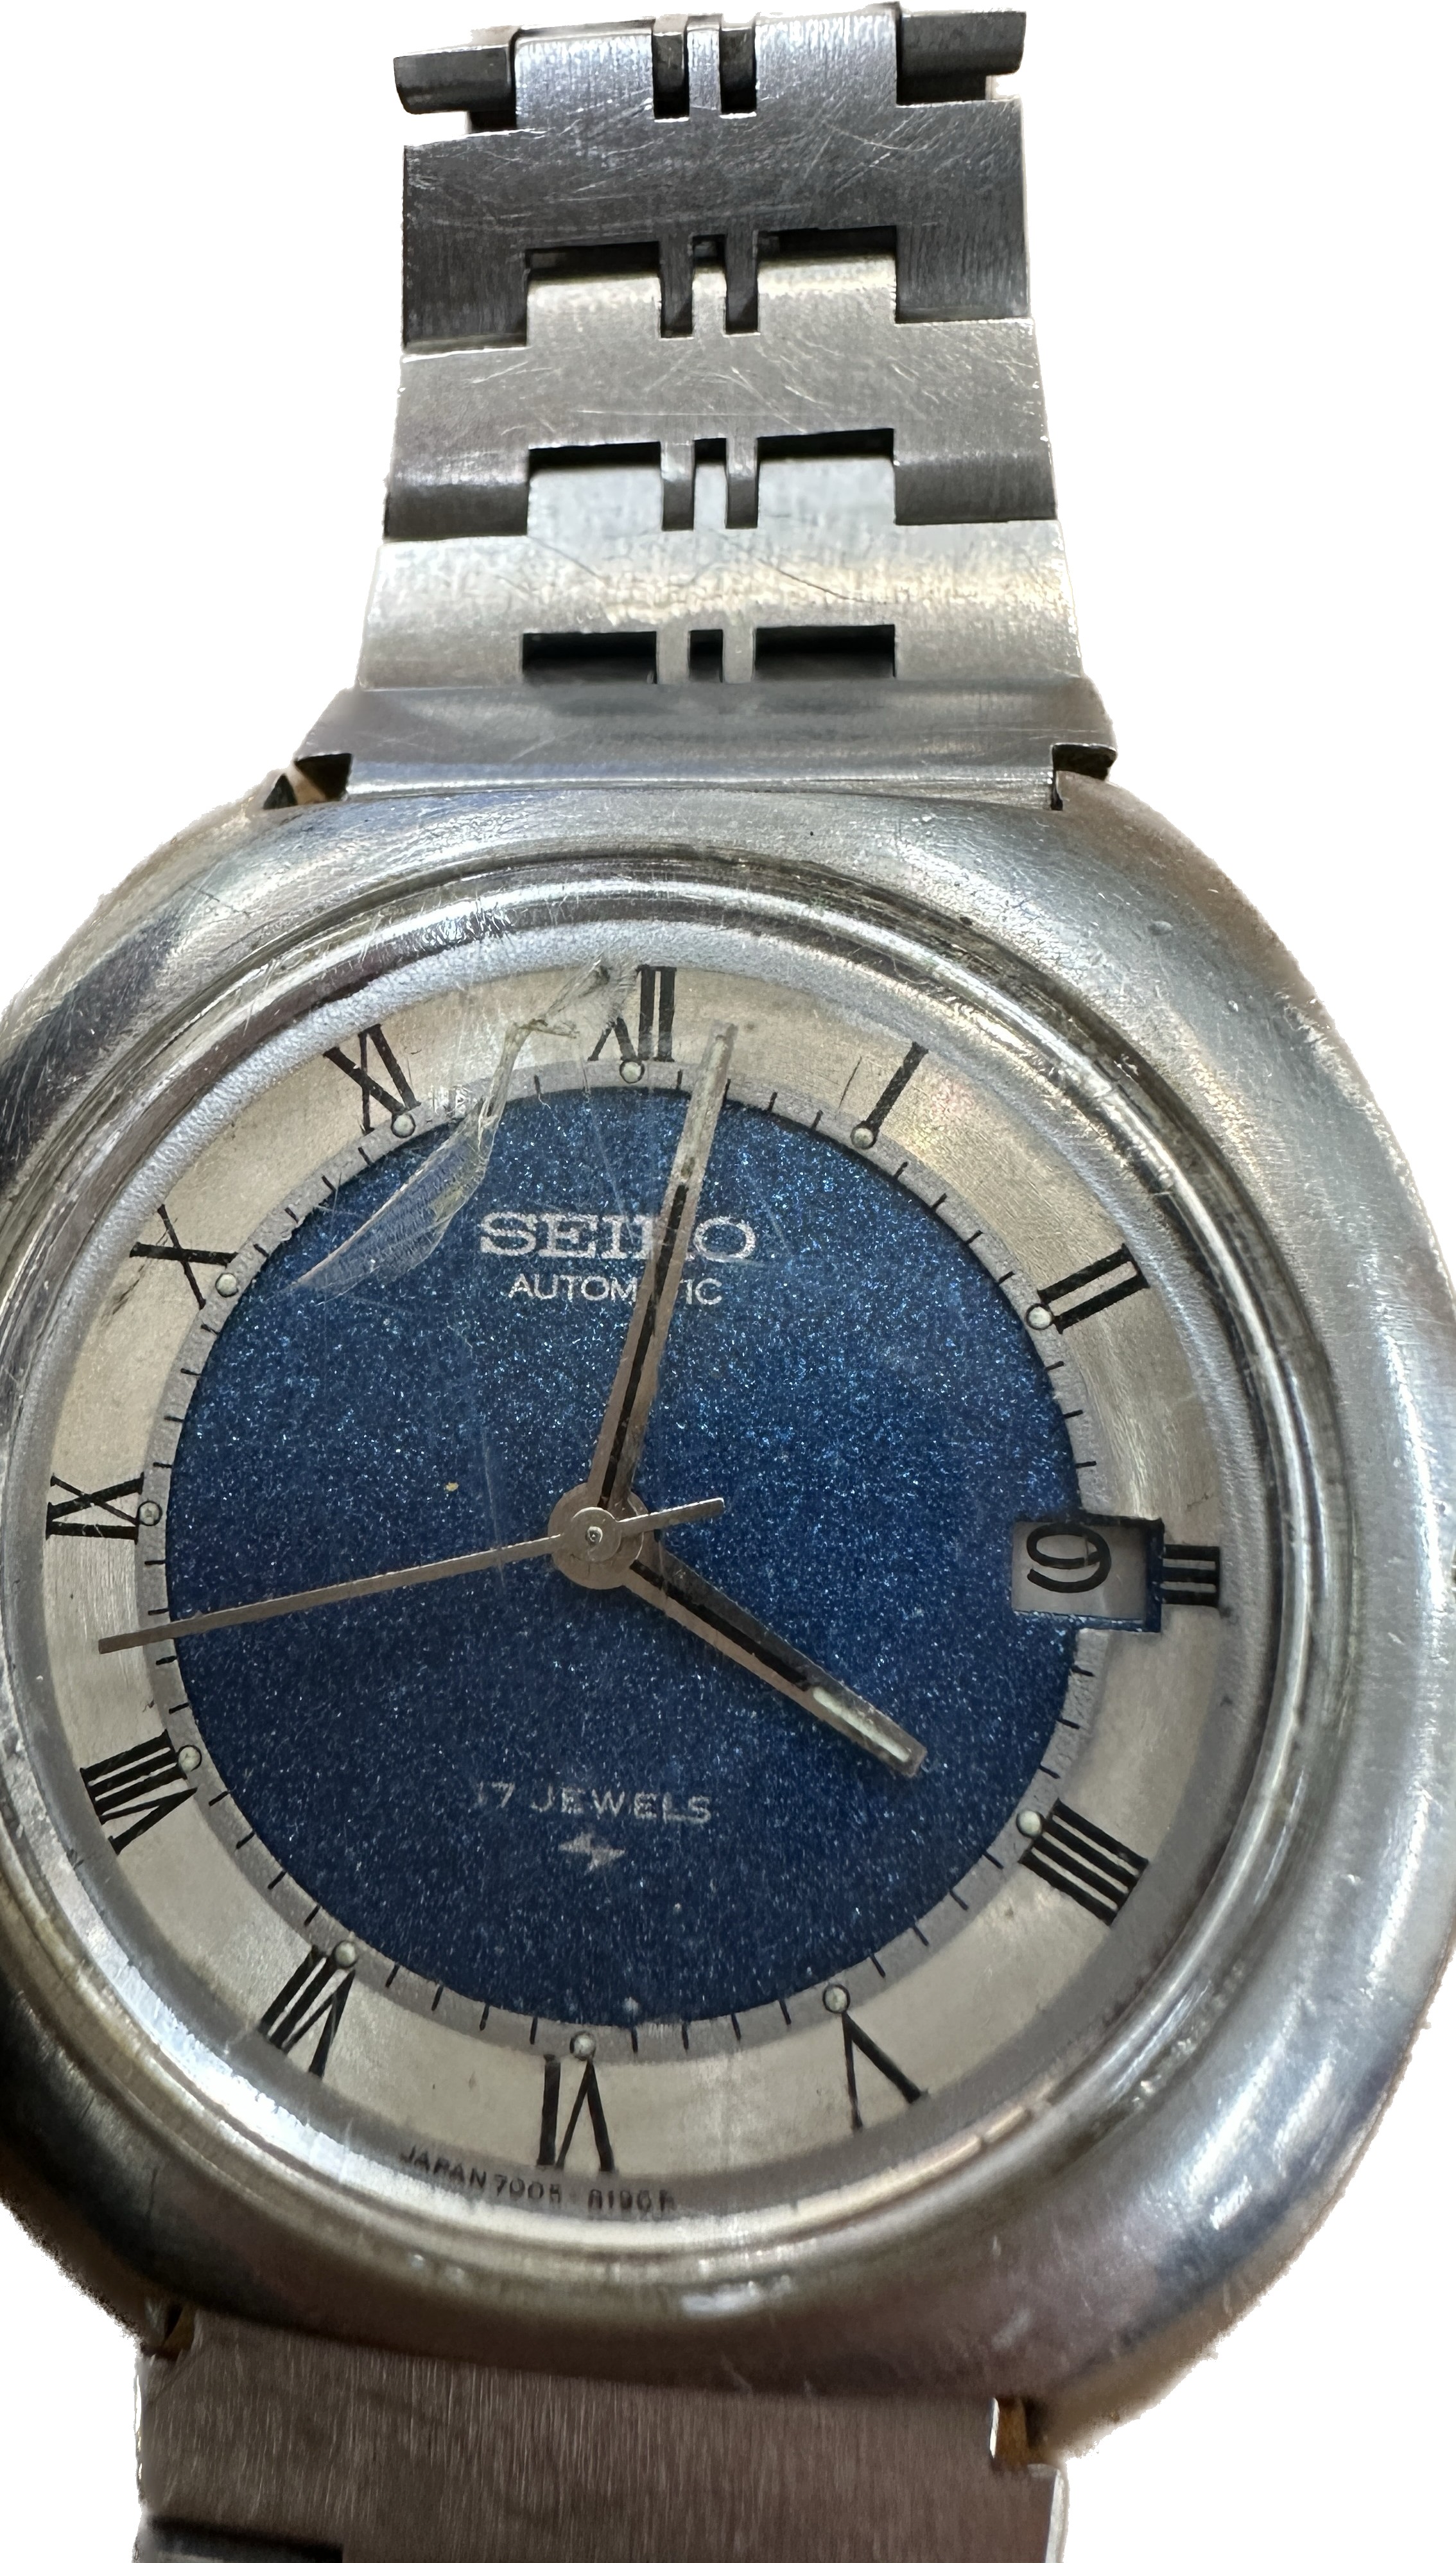 Gents Seiko wrist watch - no warranty given, in need of a new bezel - Image 3 of 5